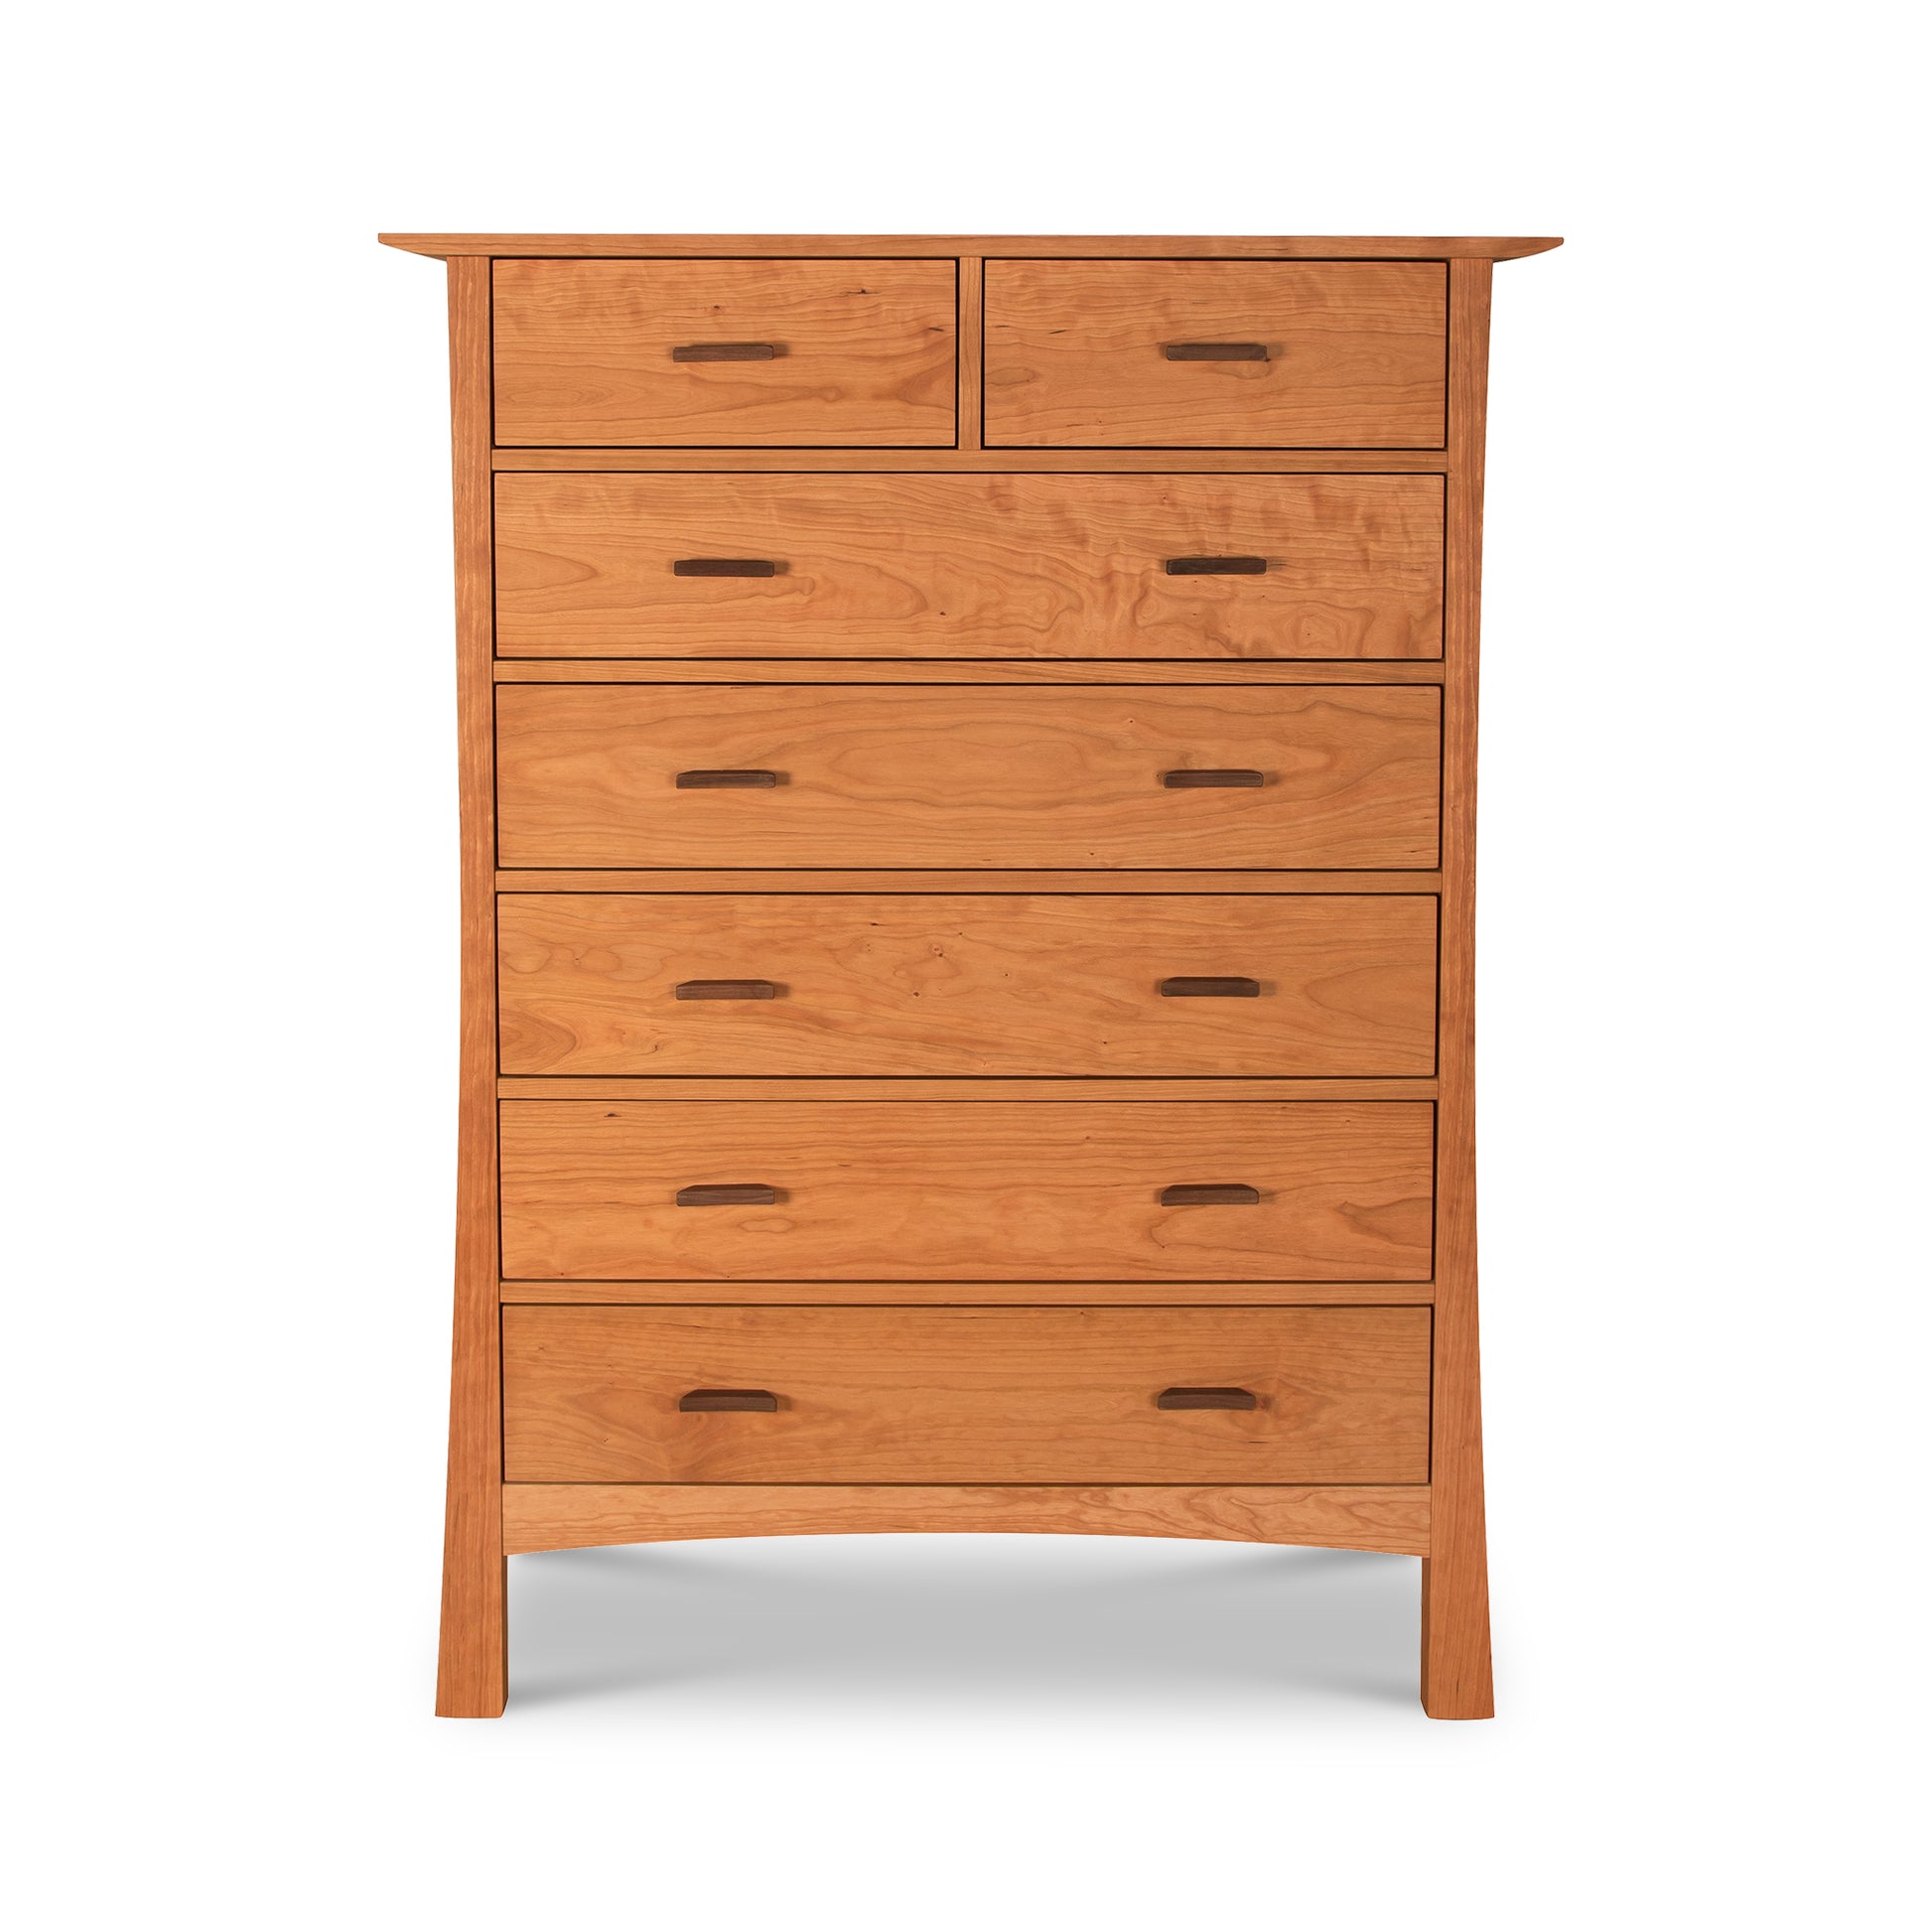 A Vermont Furniture Designs Contemporary Craftsman 7-Drawer Chest with seven evenly spaced, horizontal drawers, each with a single centered handle and an eco-friendly oil finish, standing against a white background.